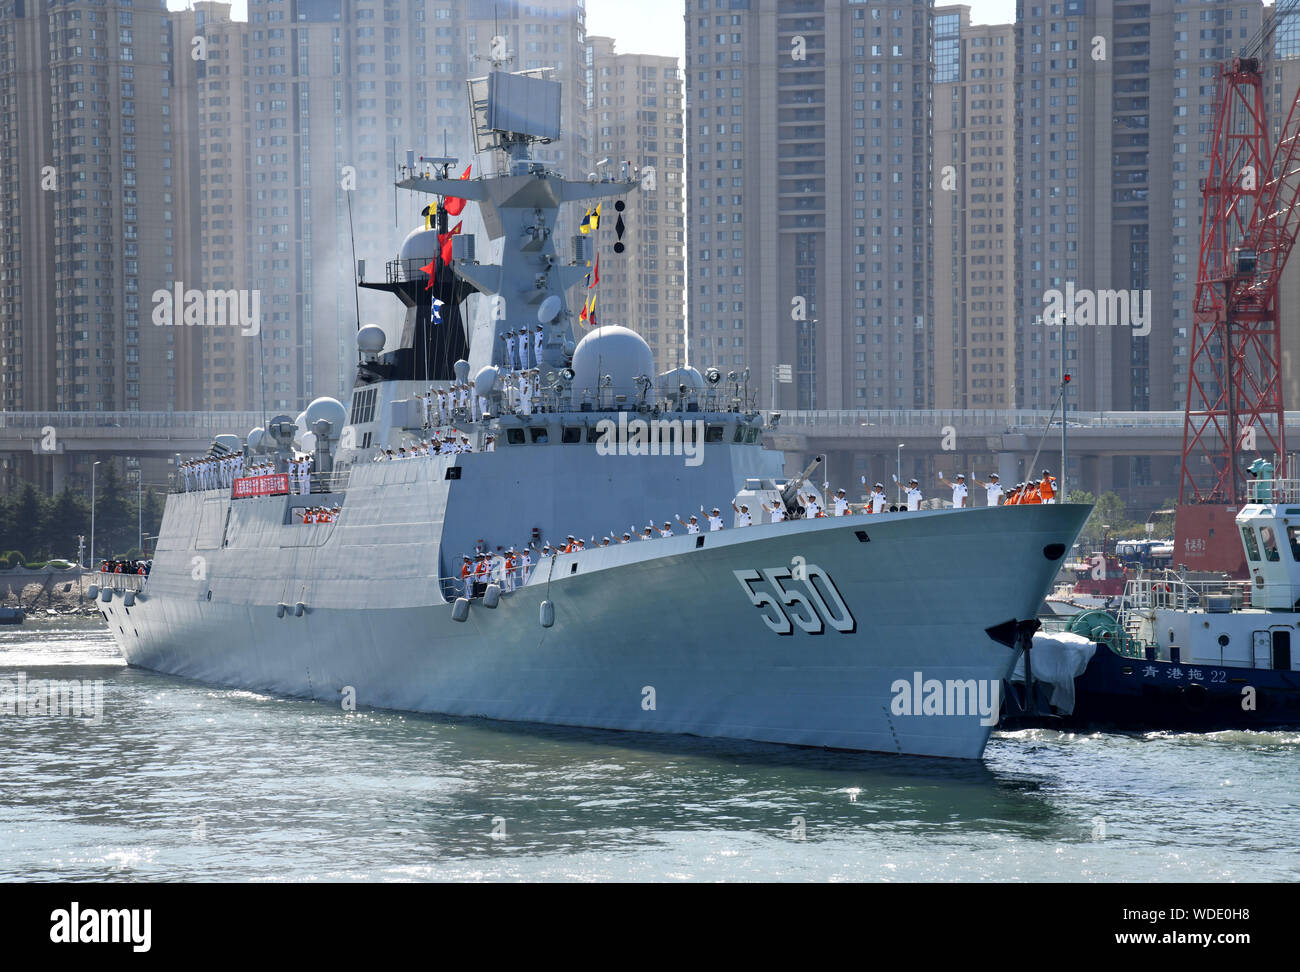 (190829) -- QINGDAO, Aug. 29, 2019 (Xinhua) -- Frigate Weifang leaves from a port in Qingdao, east China's Shandong Province, Aug. 29, 2019. The 33rd fleet from the Chinese People's Liberation Army (PLA) Navy on Thursday left the port city of Qingdao in east China's Shandong Province for the Gulf of Aden to escort civilian ships. (Xinhua/Li Ziheng) Stock Photo